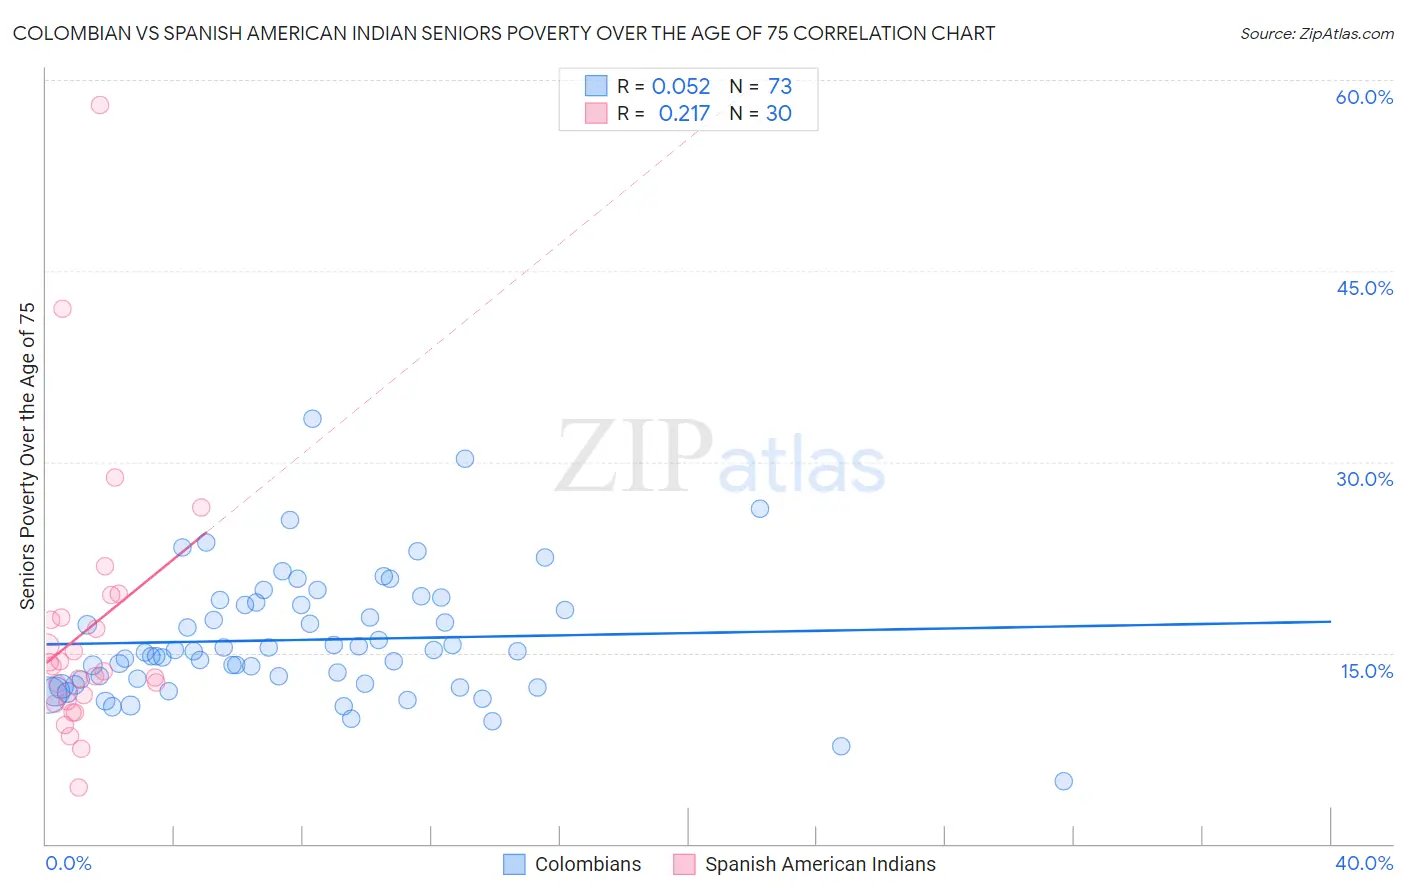 Colombian vs Spanish American Indian Seniors Poverty Over the Age of 75